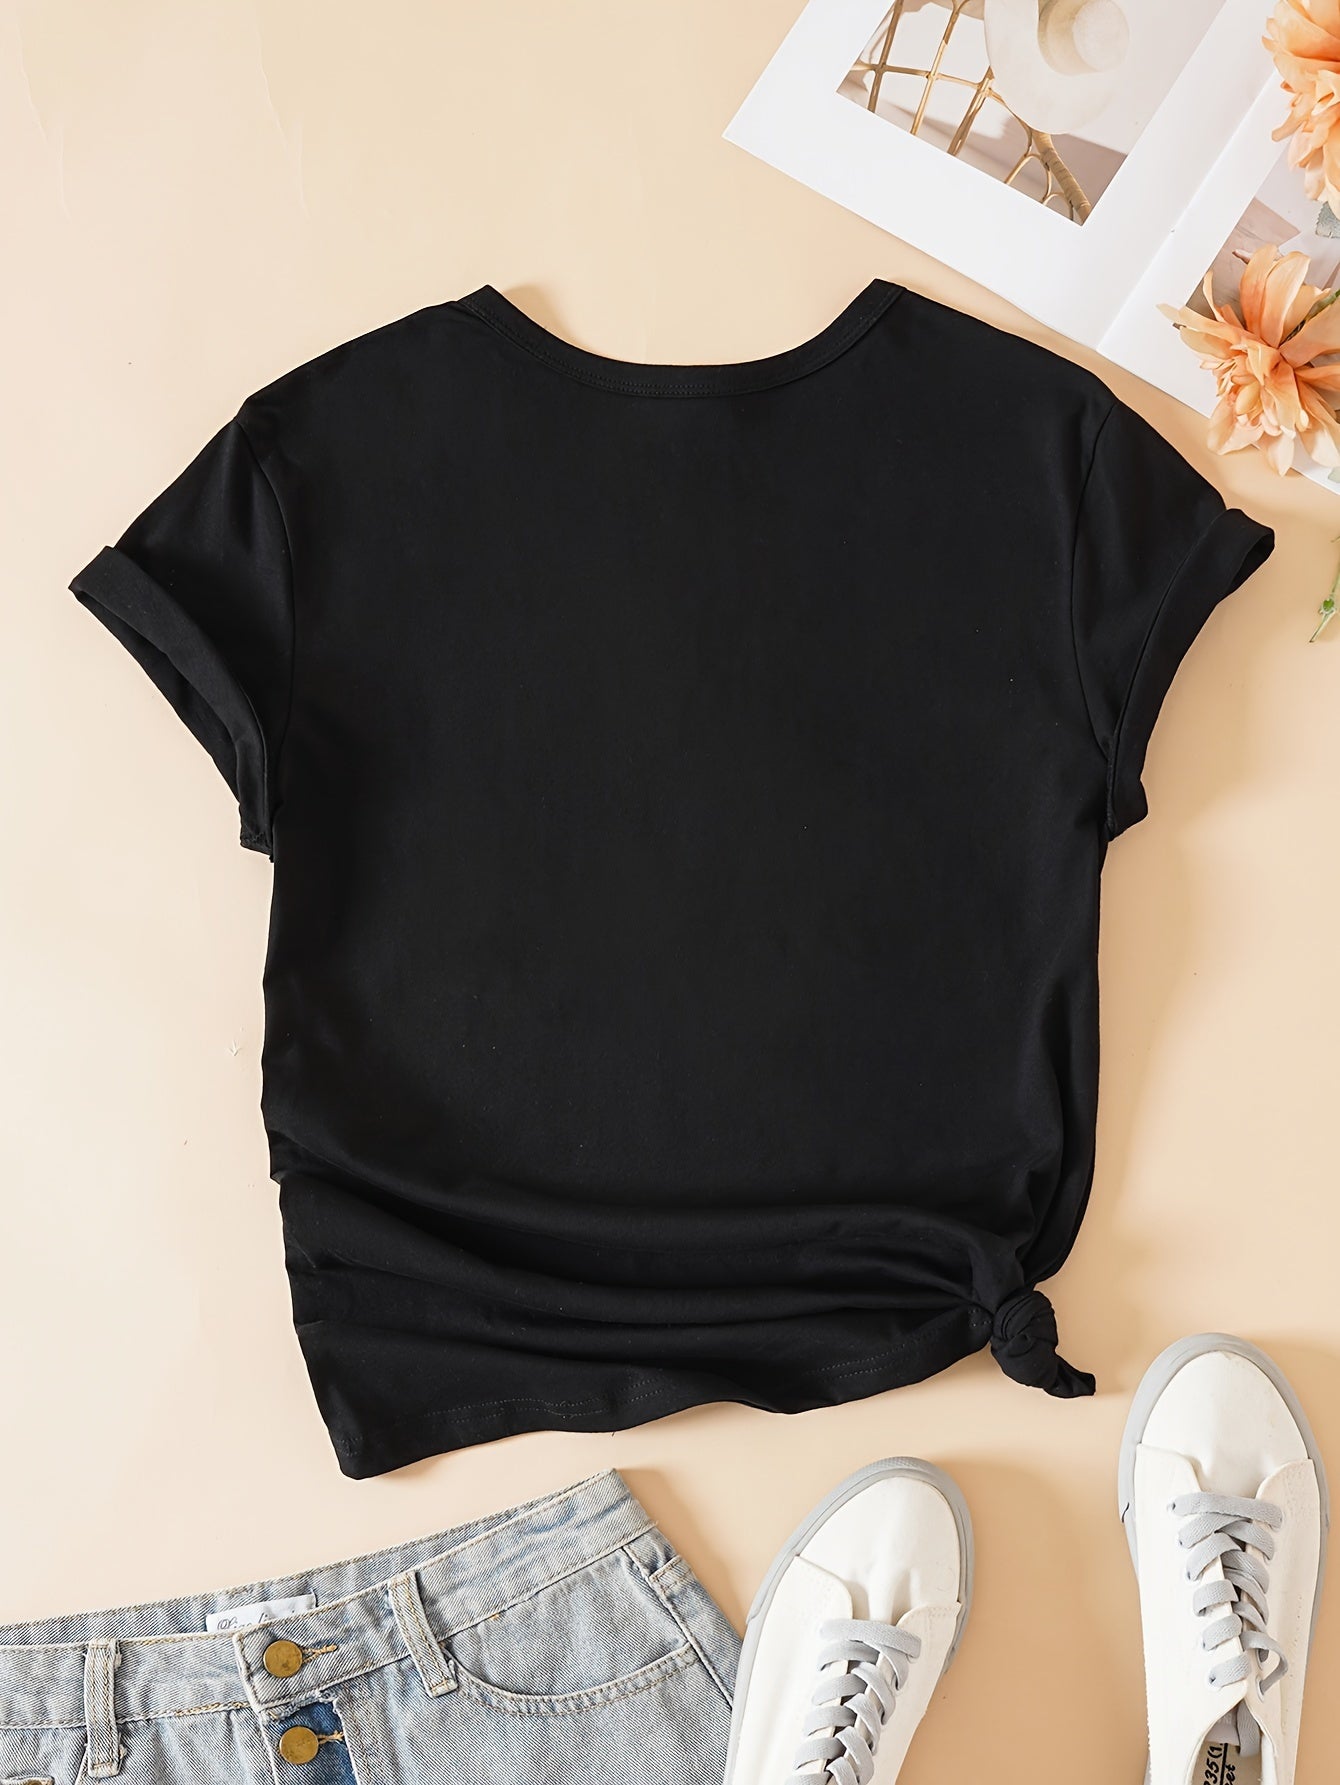 Plus Size Letter Print T-Shirt, Casual Short Sleeve Top For Spring & Summer, Women's Plus Size Clothing claimedbygoddesigns